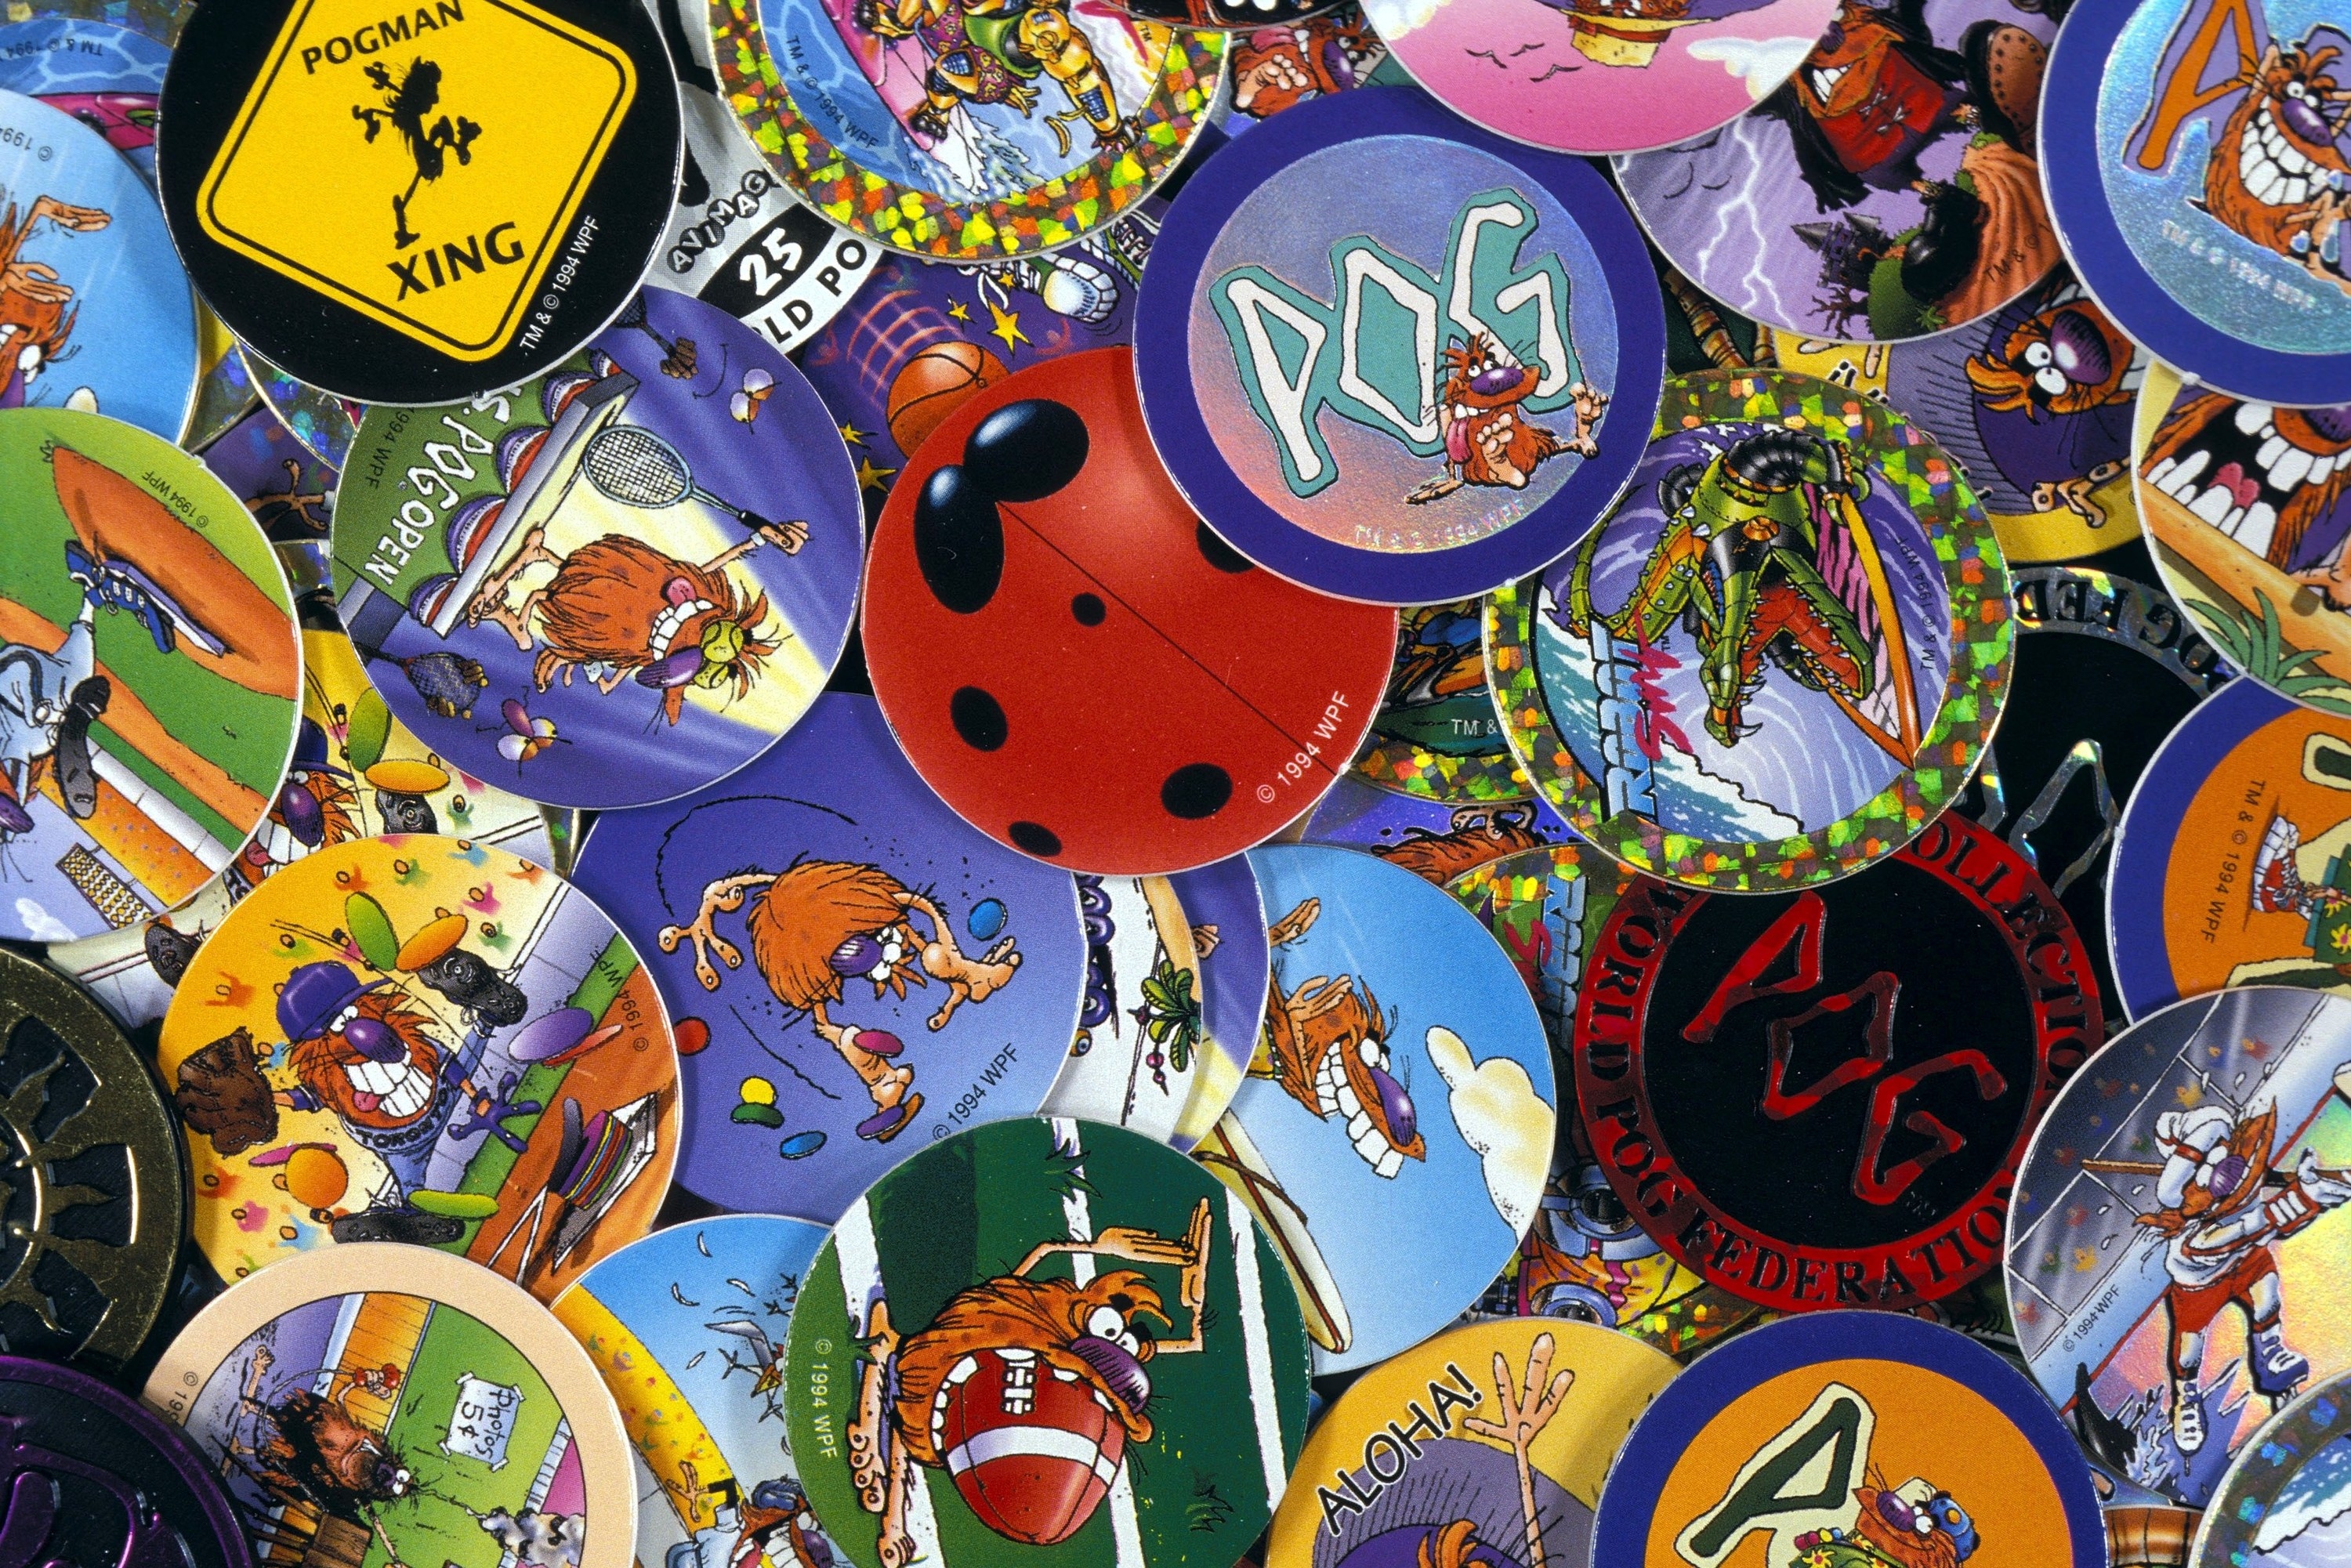 A bunch of pogs with different images. 